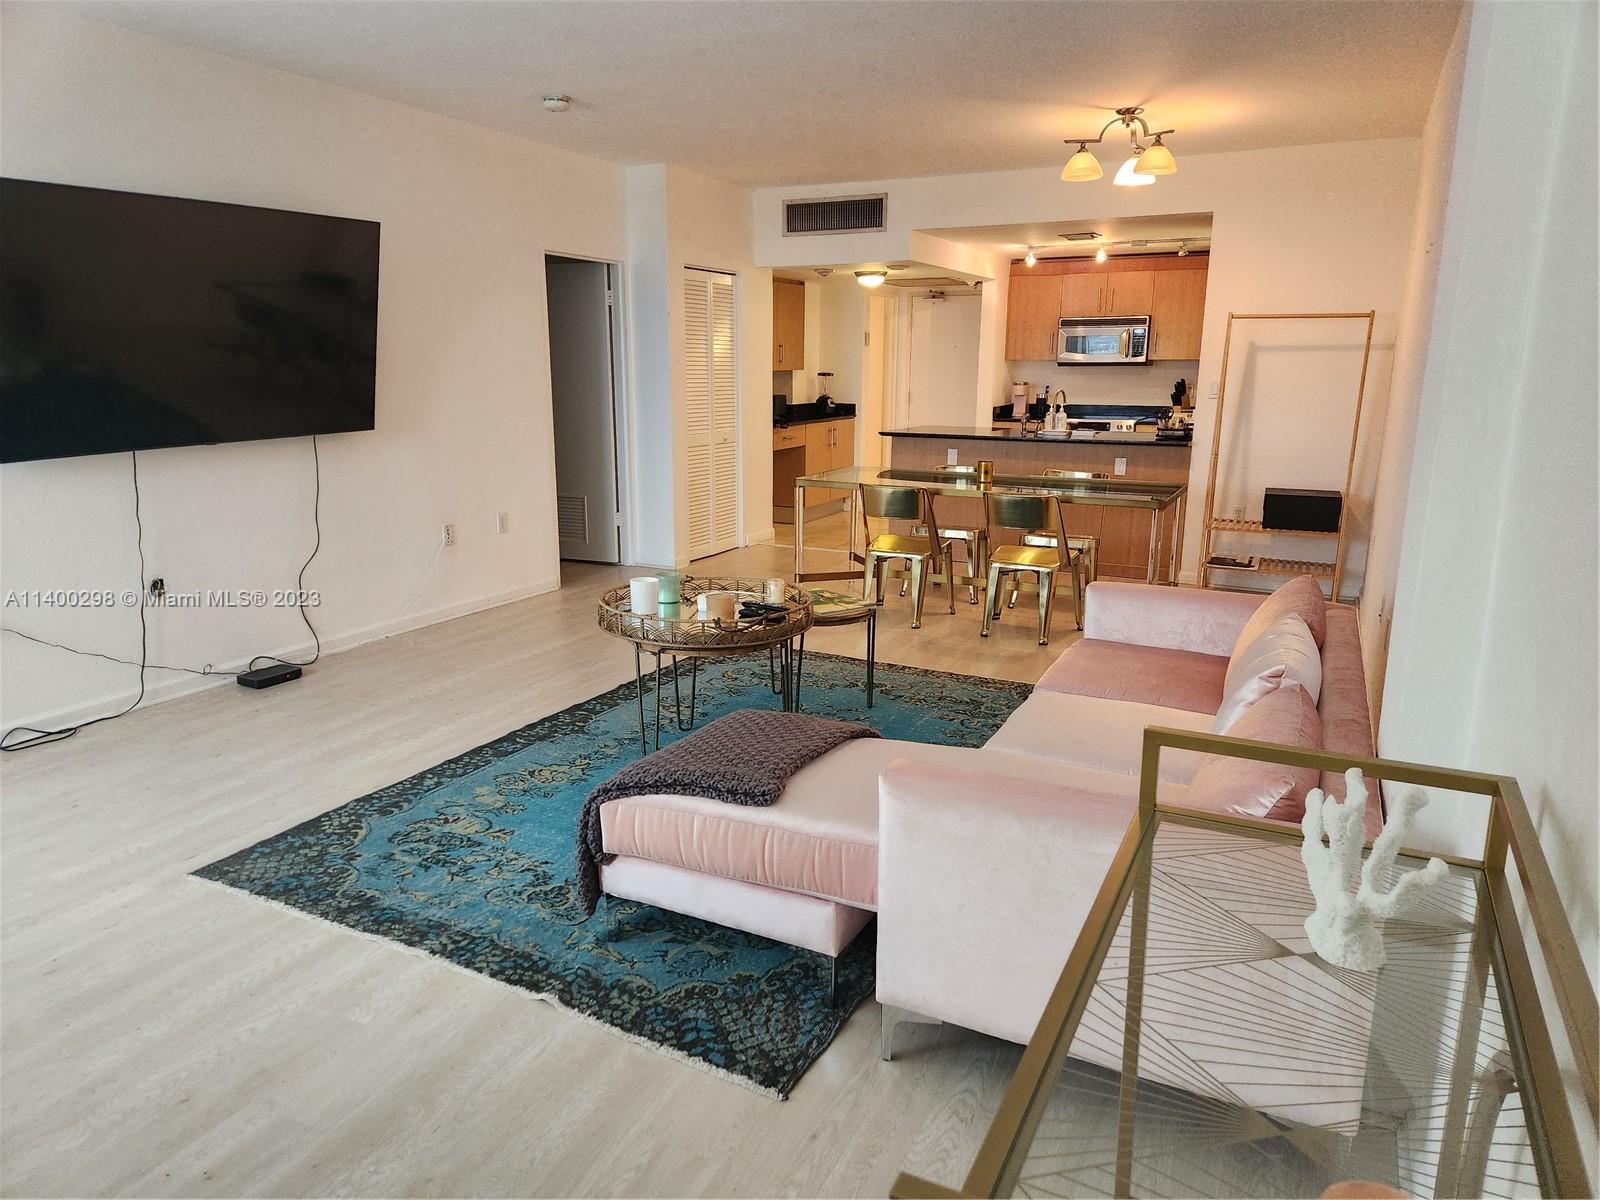 Photo 2 of Harbour House Apt 1528 in Bal Harbour - MLS A11400298